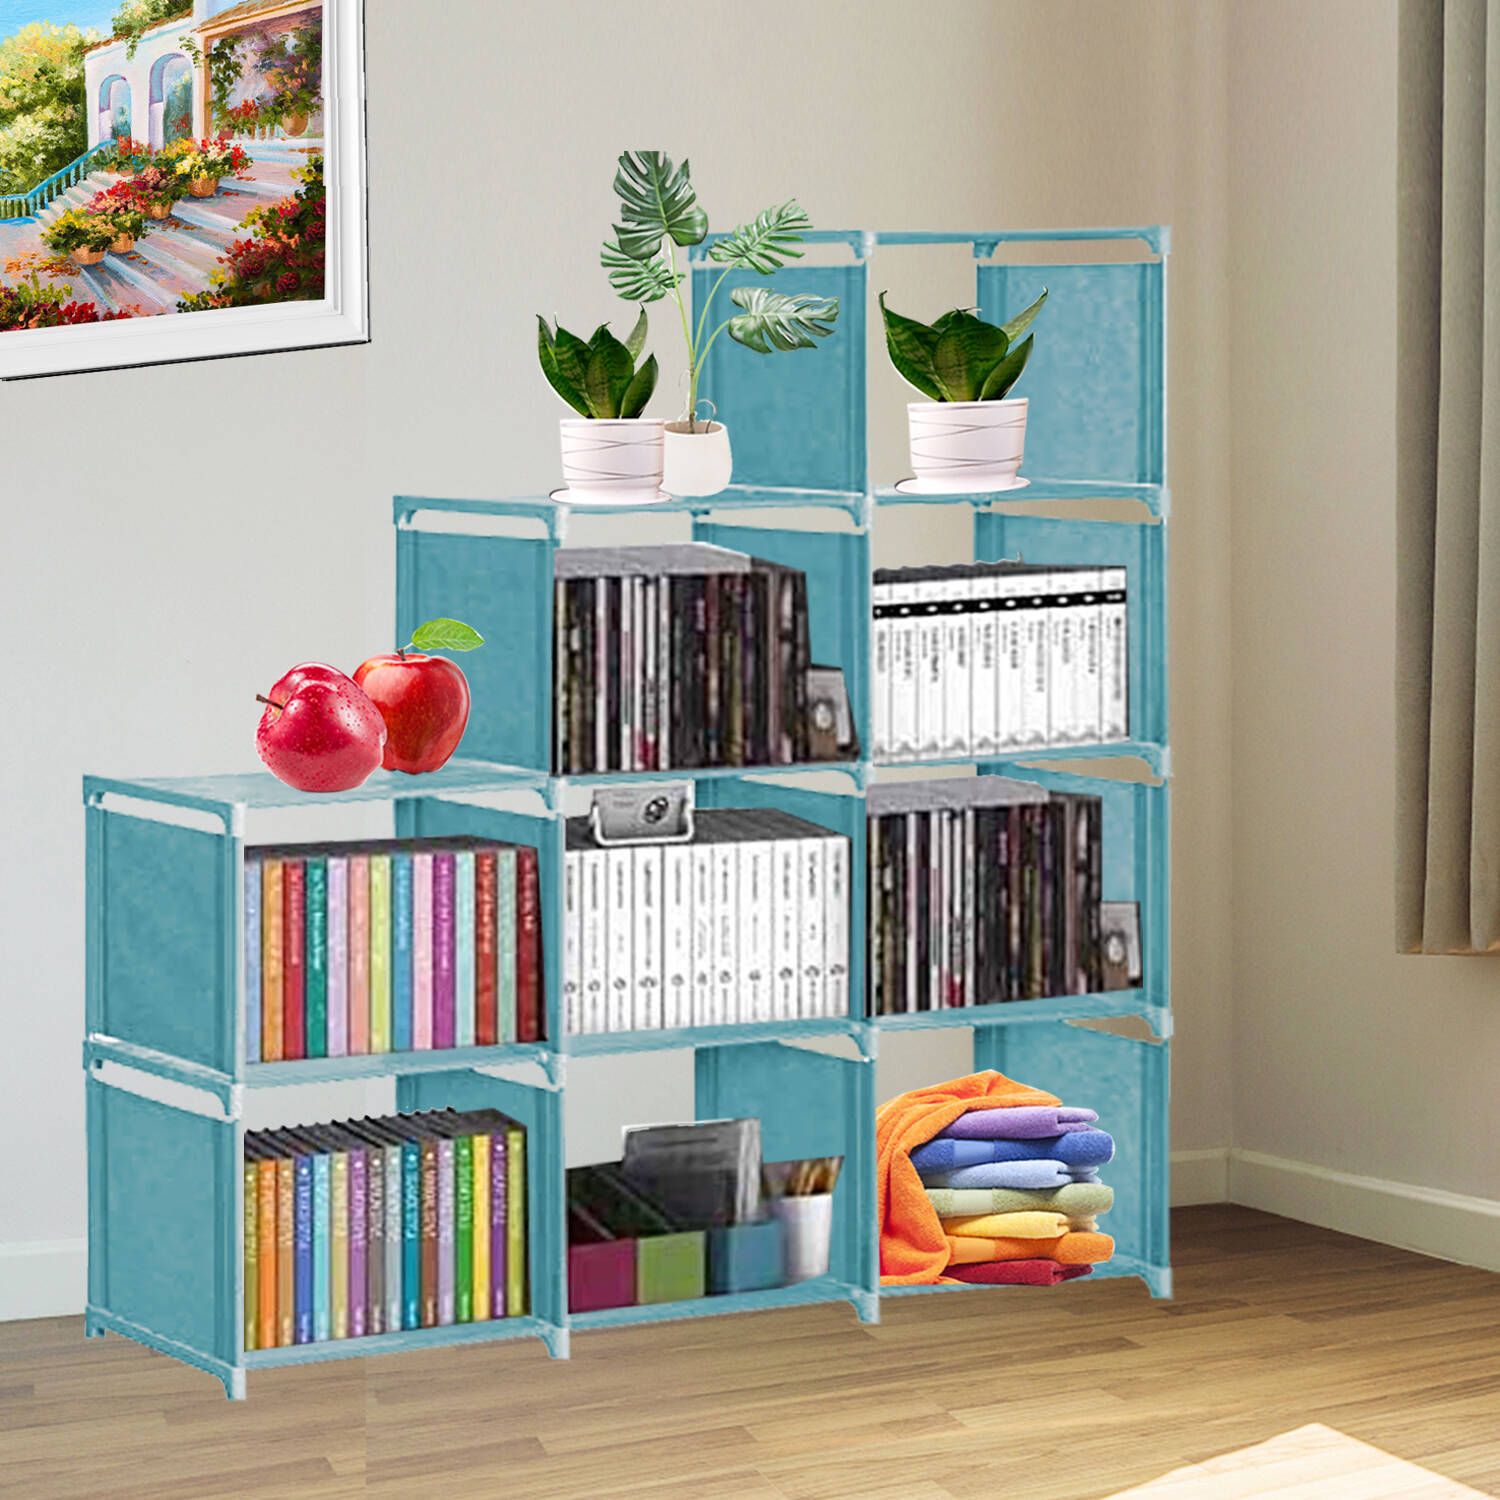 Qhomic Kid Adjustable Bookcase Storage Bookshelf with 9 Cube Book Shelves For Kids Adult, Blue - image 1 of 9